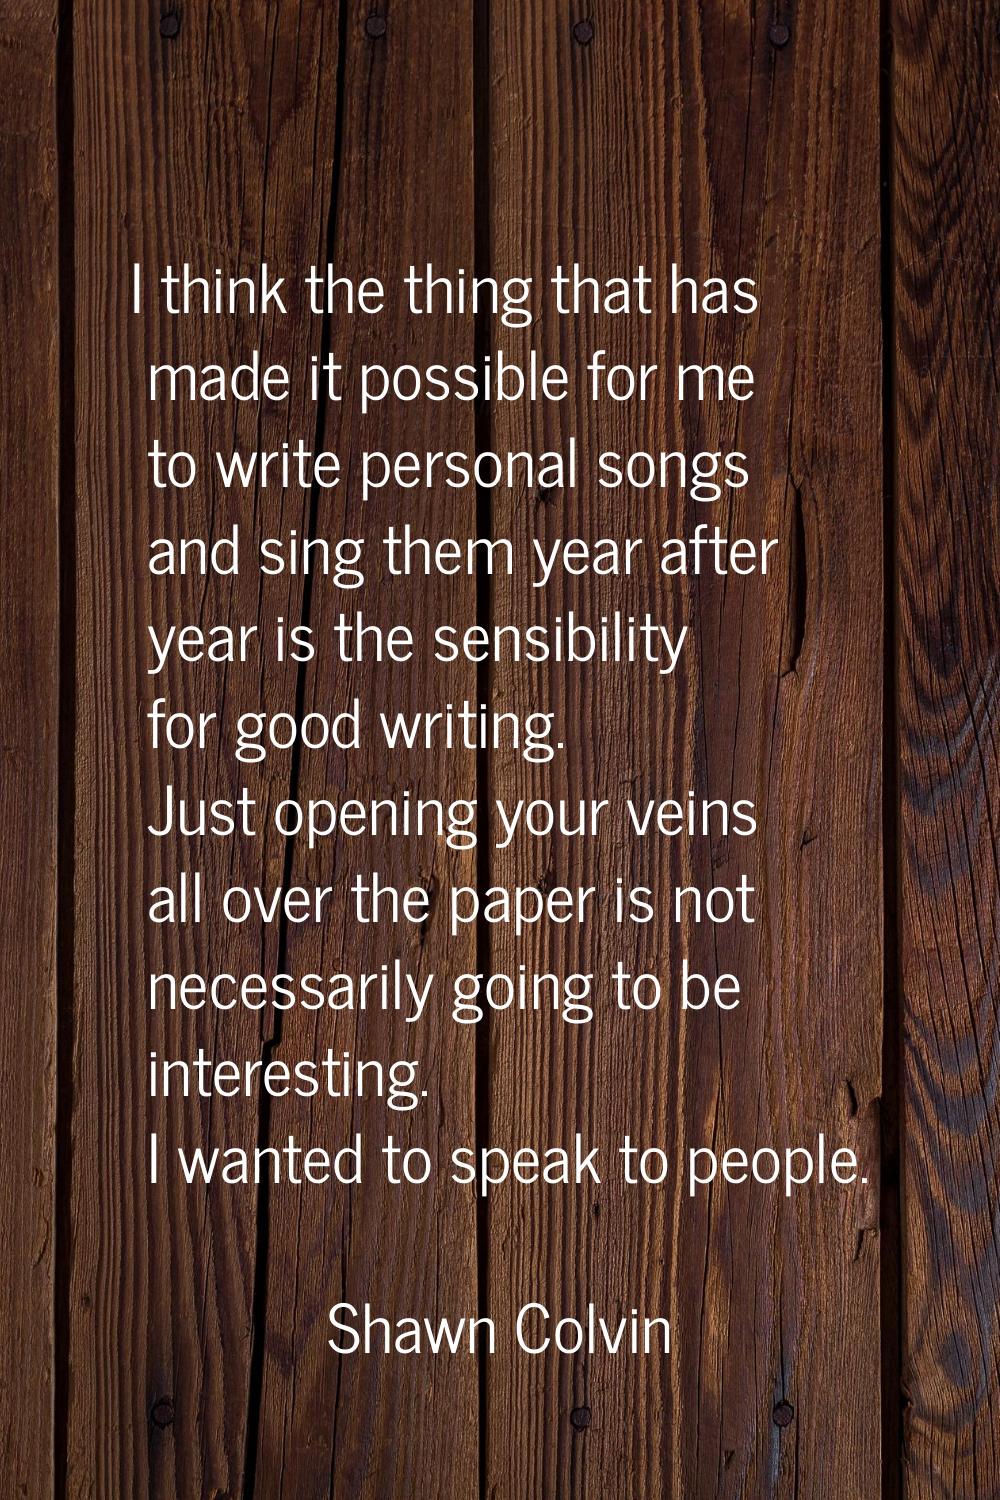 I think the thing that has made it possible for me to write personal songs and sing them year after